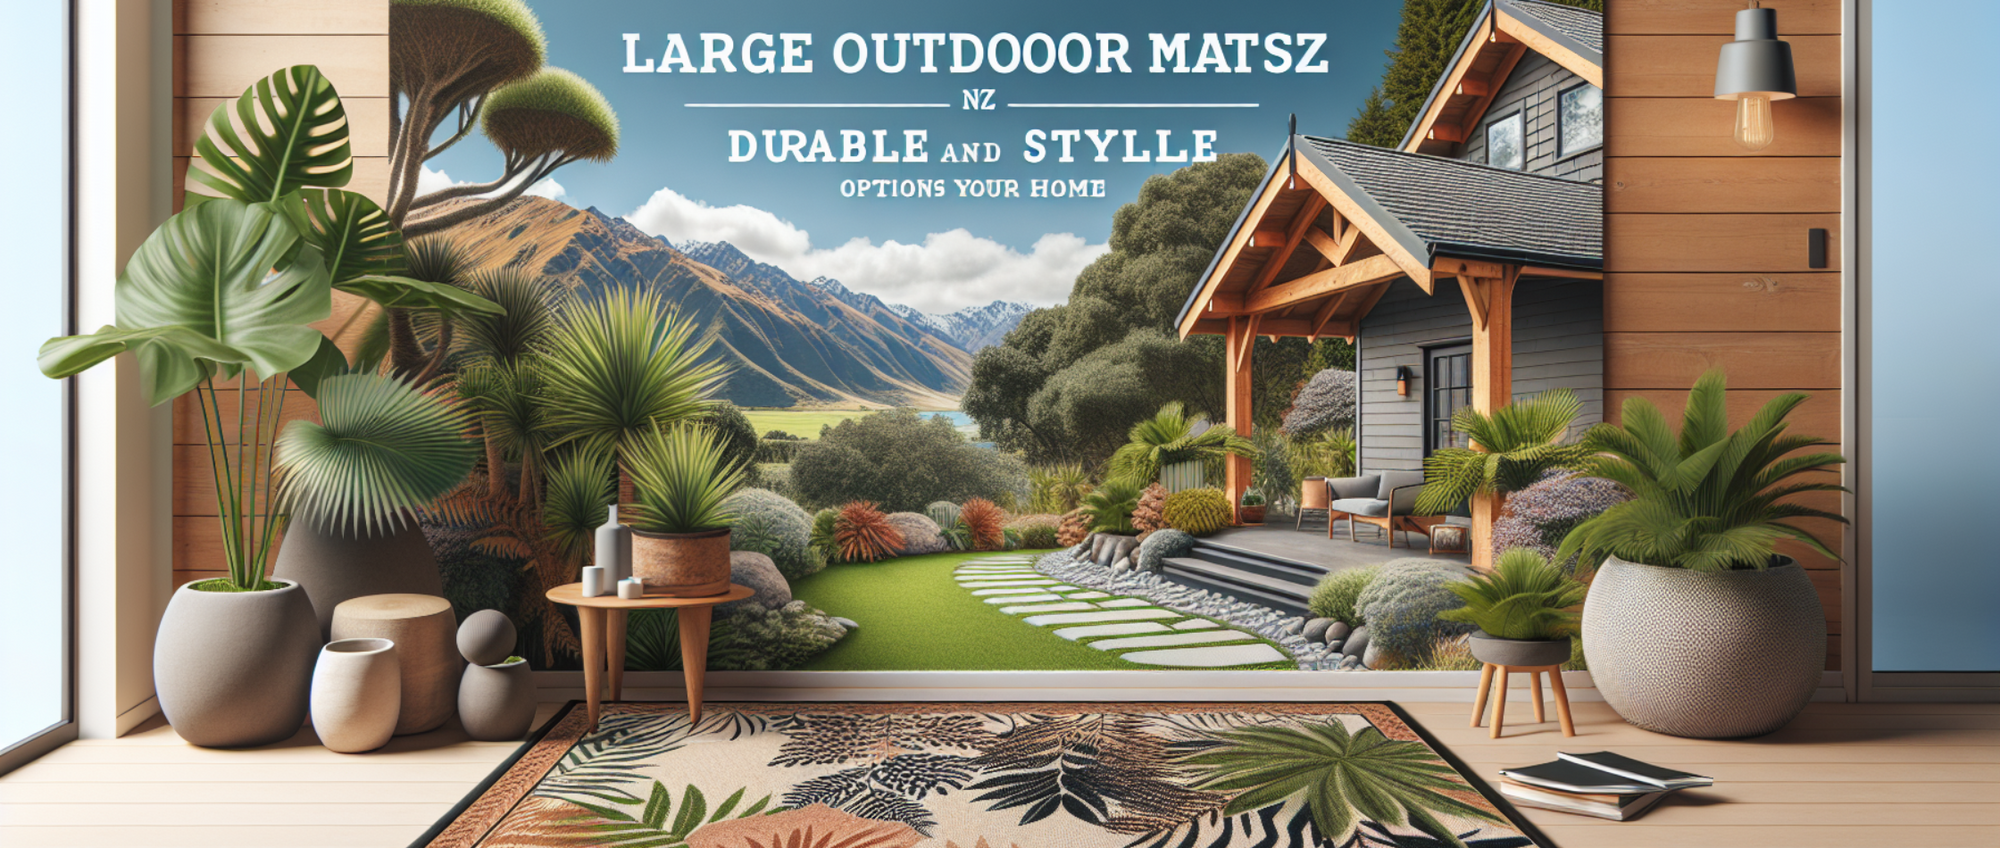 Large Outdoor Mats NZ: Durable and Stylish Options for Your Home